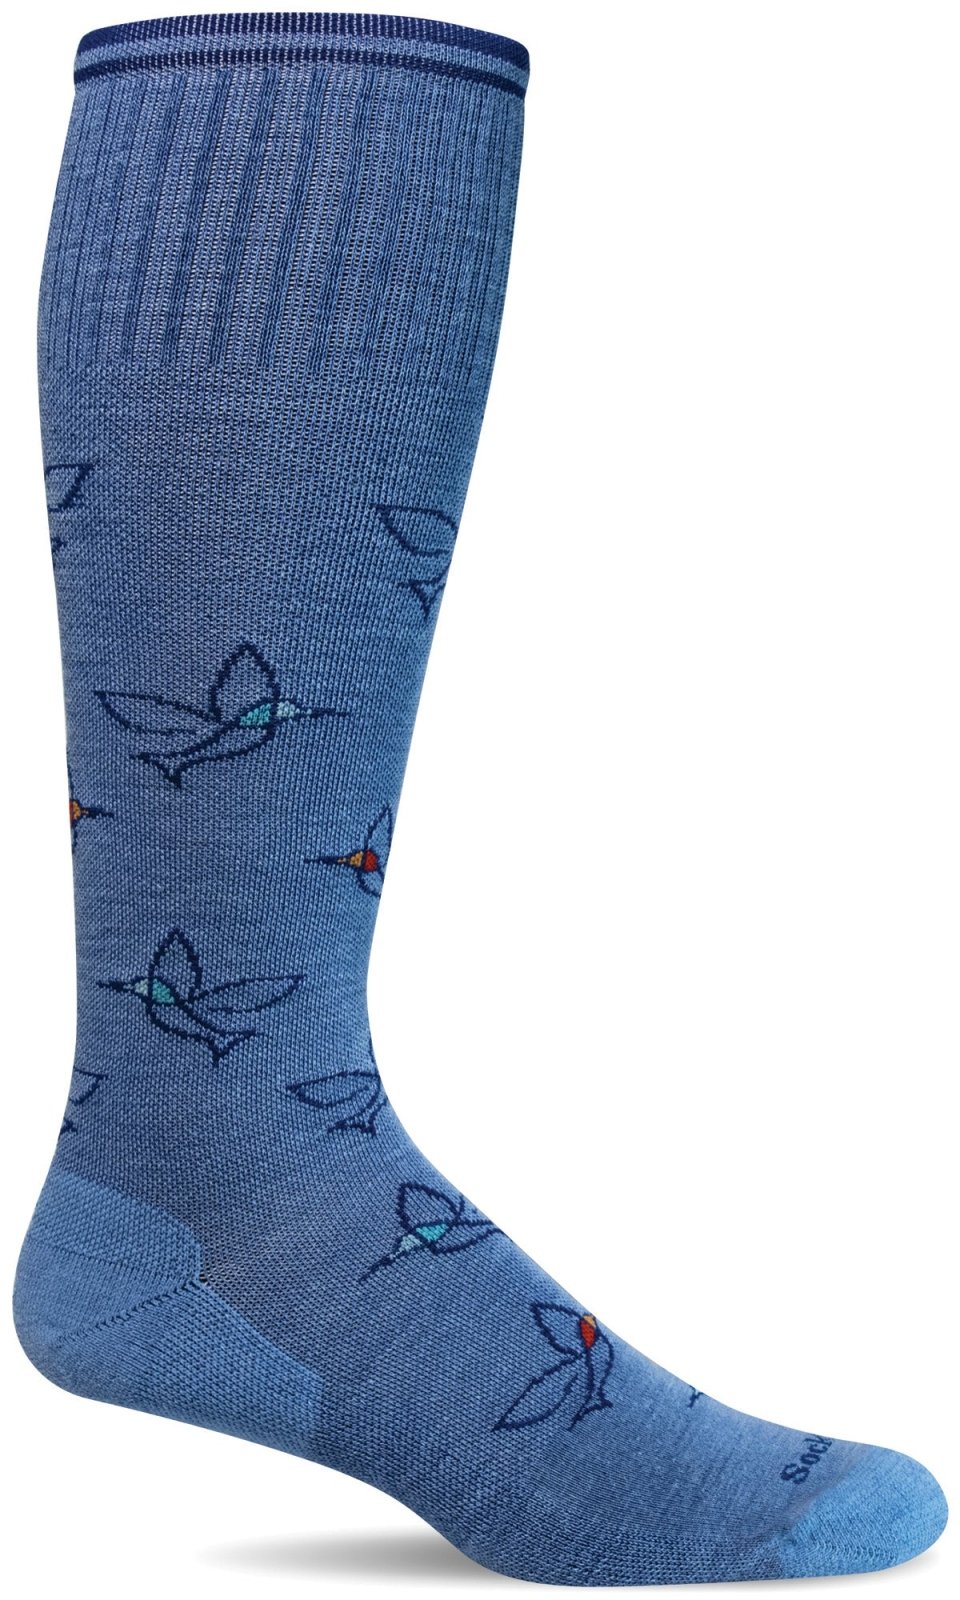 Women's Free Fly | Moderate Graduated Compression Socks - Merino Wool Lifestyle Compression - Sockwell